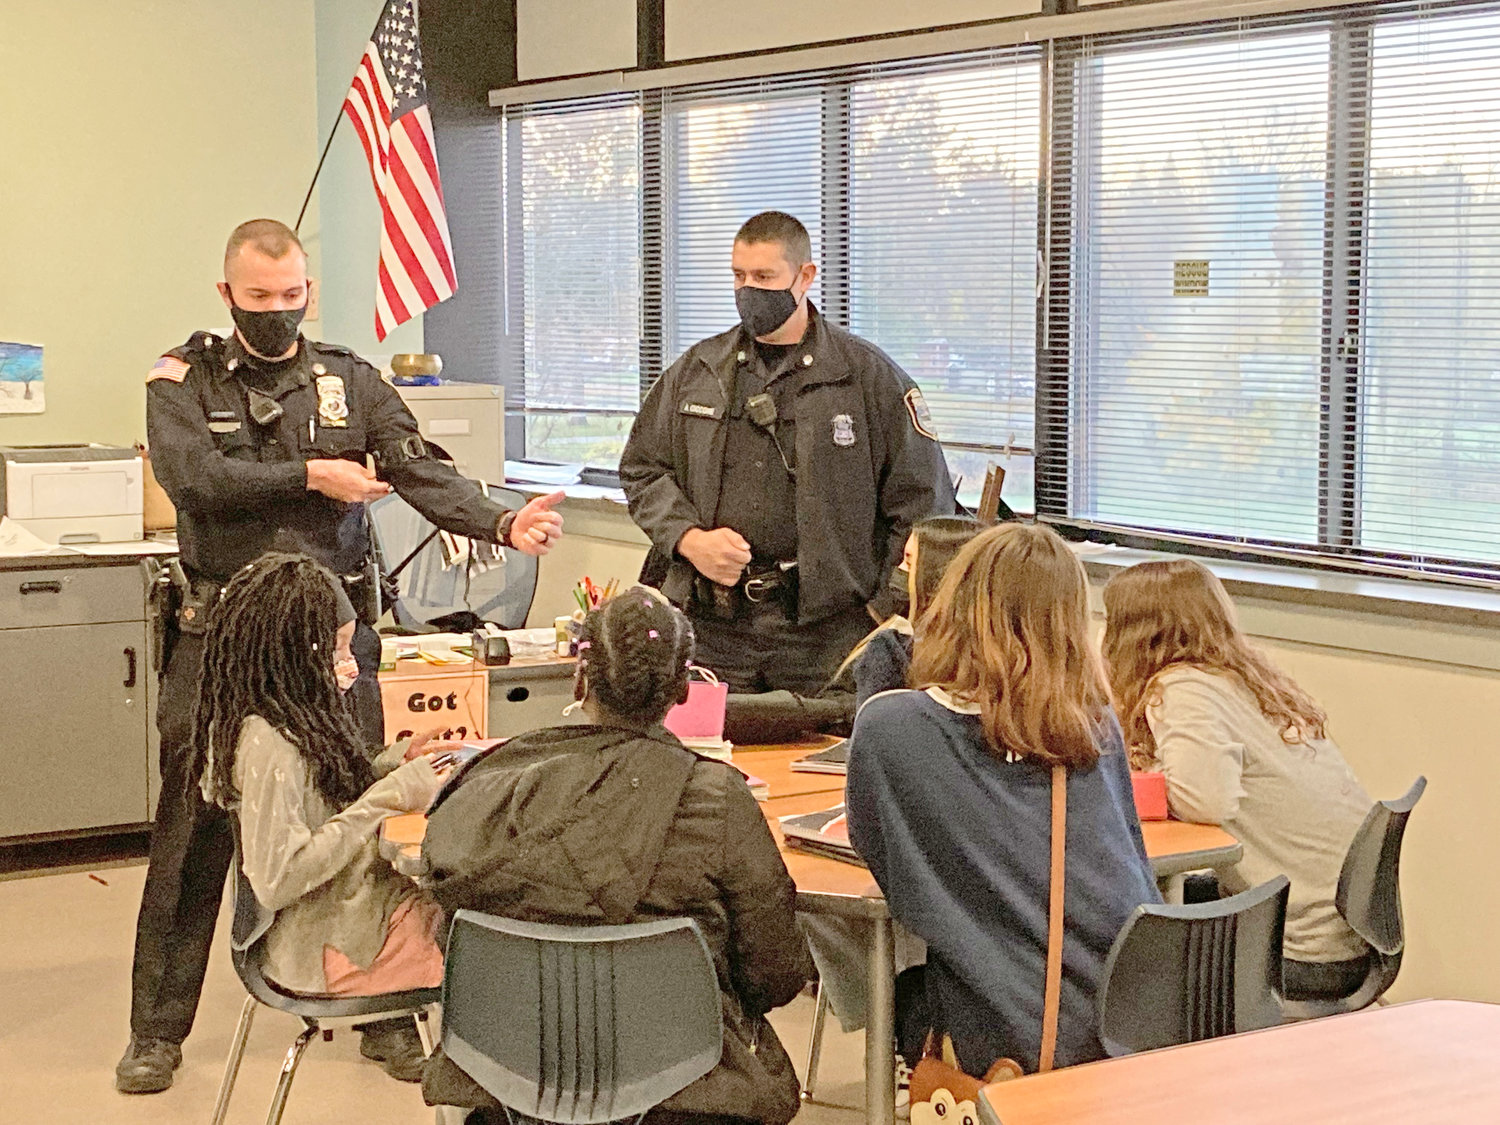 STUDYING THE EVIDENCE — A group of Strough Middle School seventh-graders discuss the findings of their classroom investigation with school resource officers recently. The activity was designed to help students learn about law enforcers and develop positive relationships in a fun learning environment.